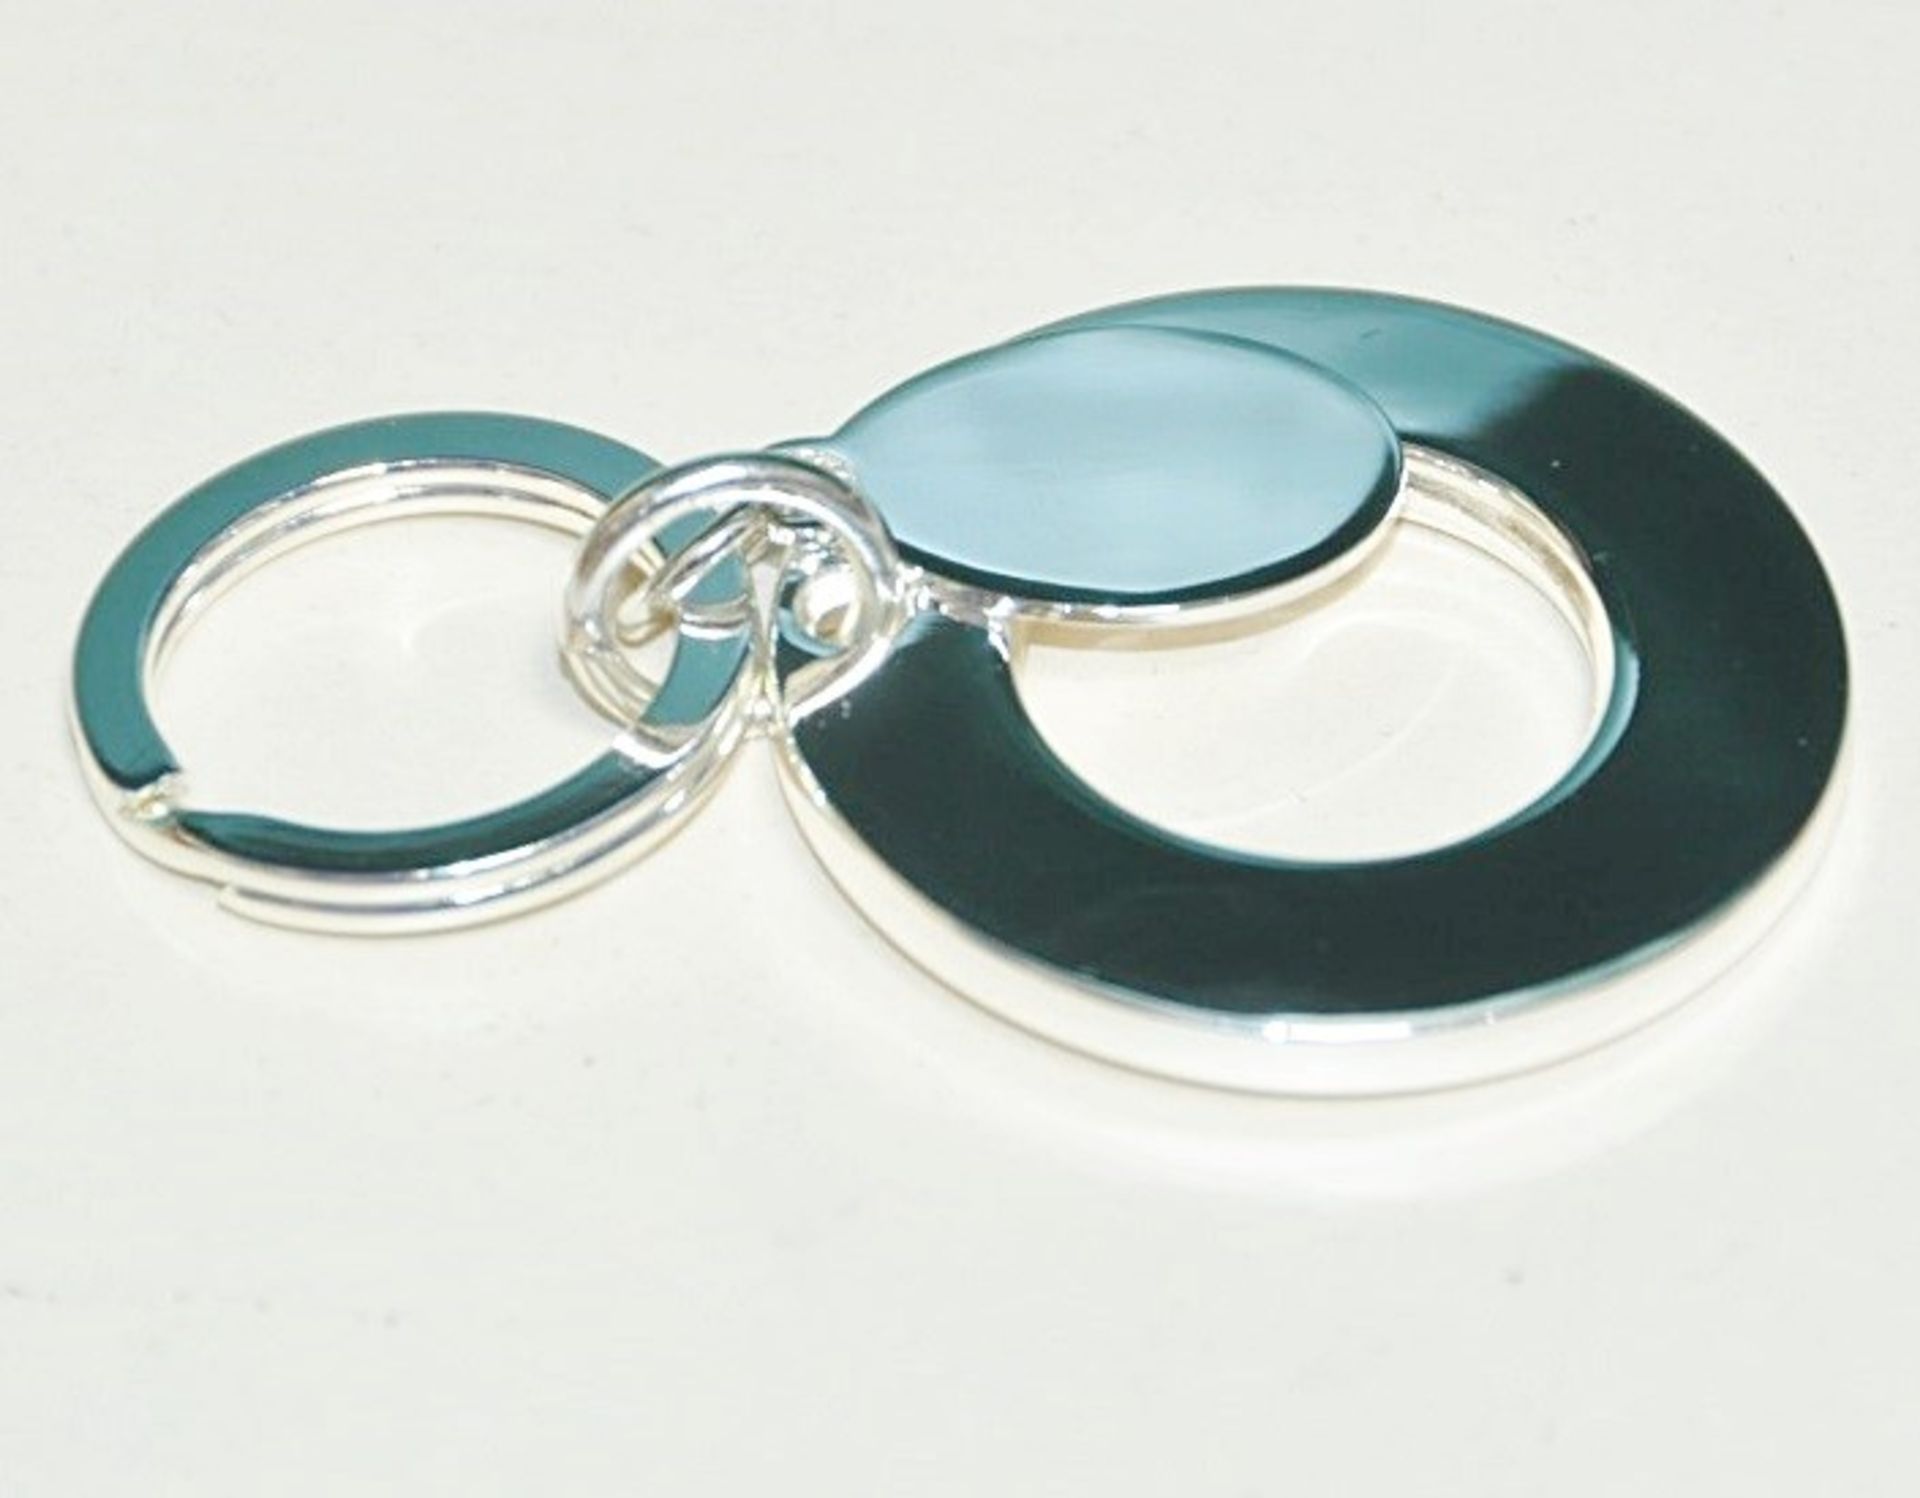 40 x Silver Plated Key Rings By ICE London - Design: SOLAR - MADE WITH "SWAROVSKI¨ ELEMENTS - Luxury - Image 3 of 3